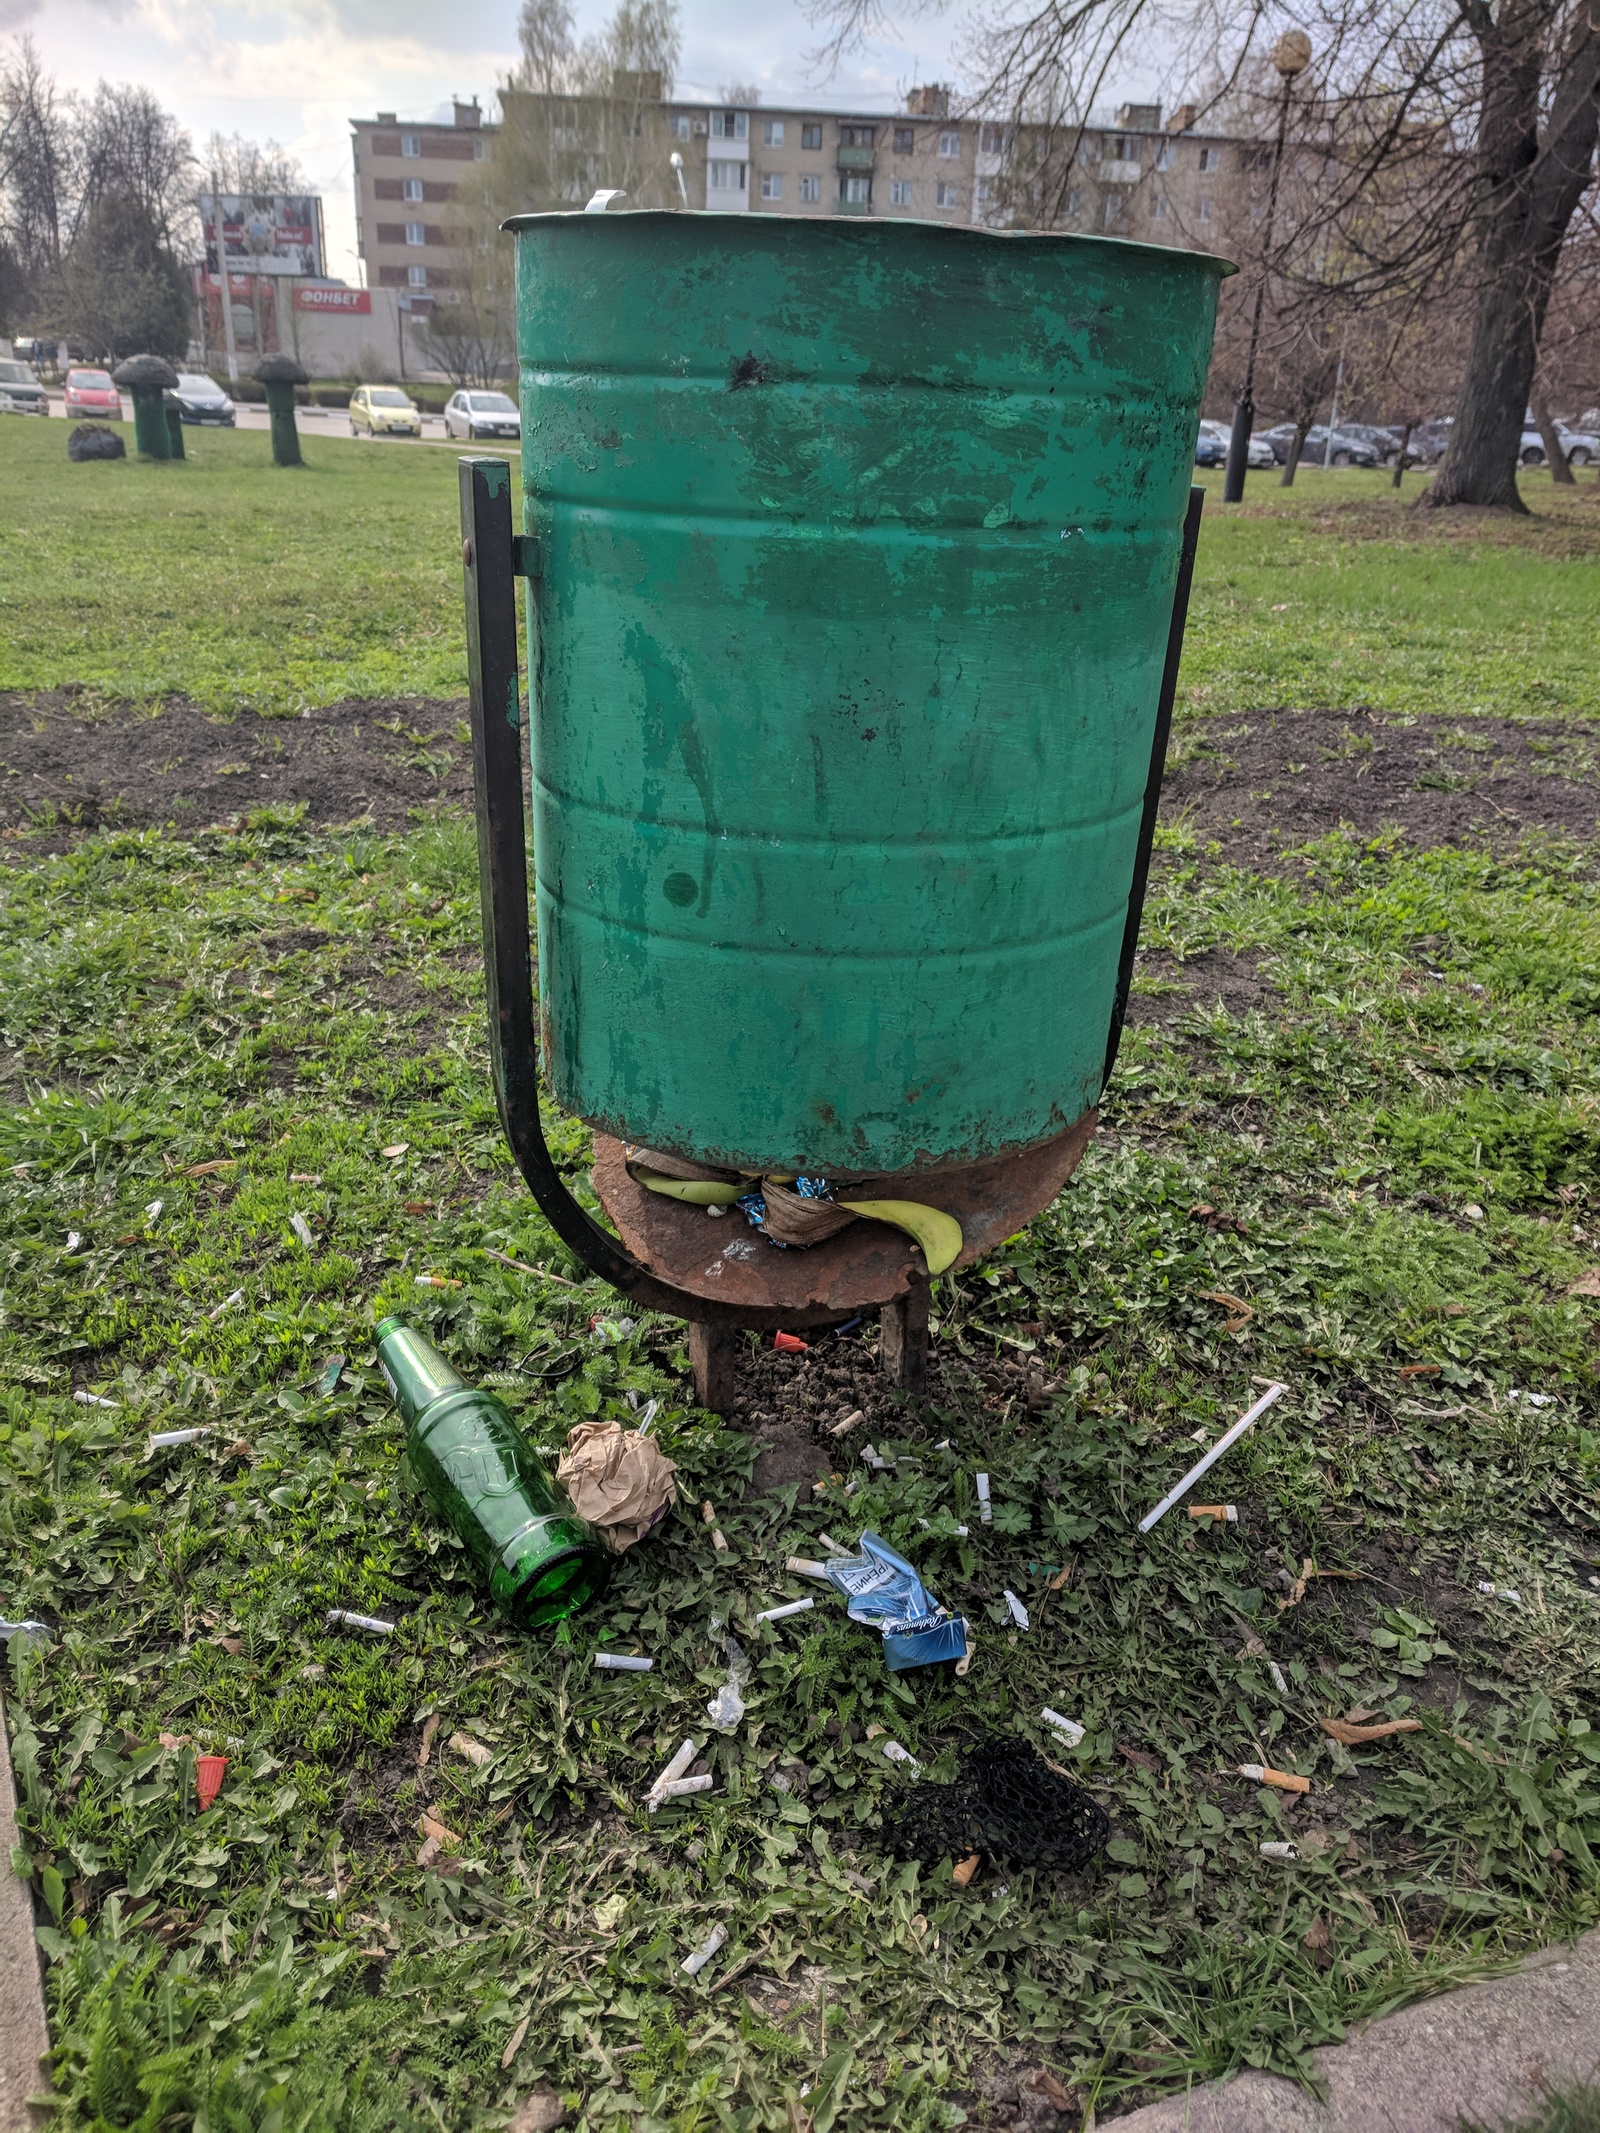 How do you like these ultra modern bins? - My, Garbage, Urn, The park, Failure